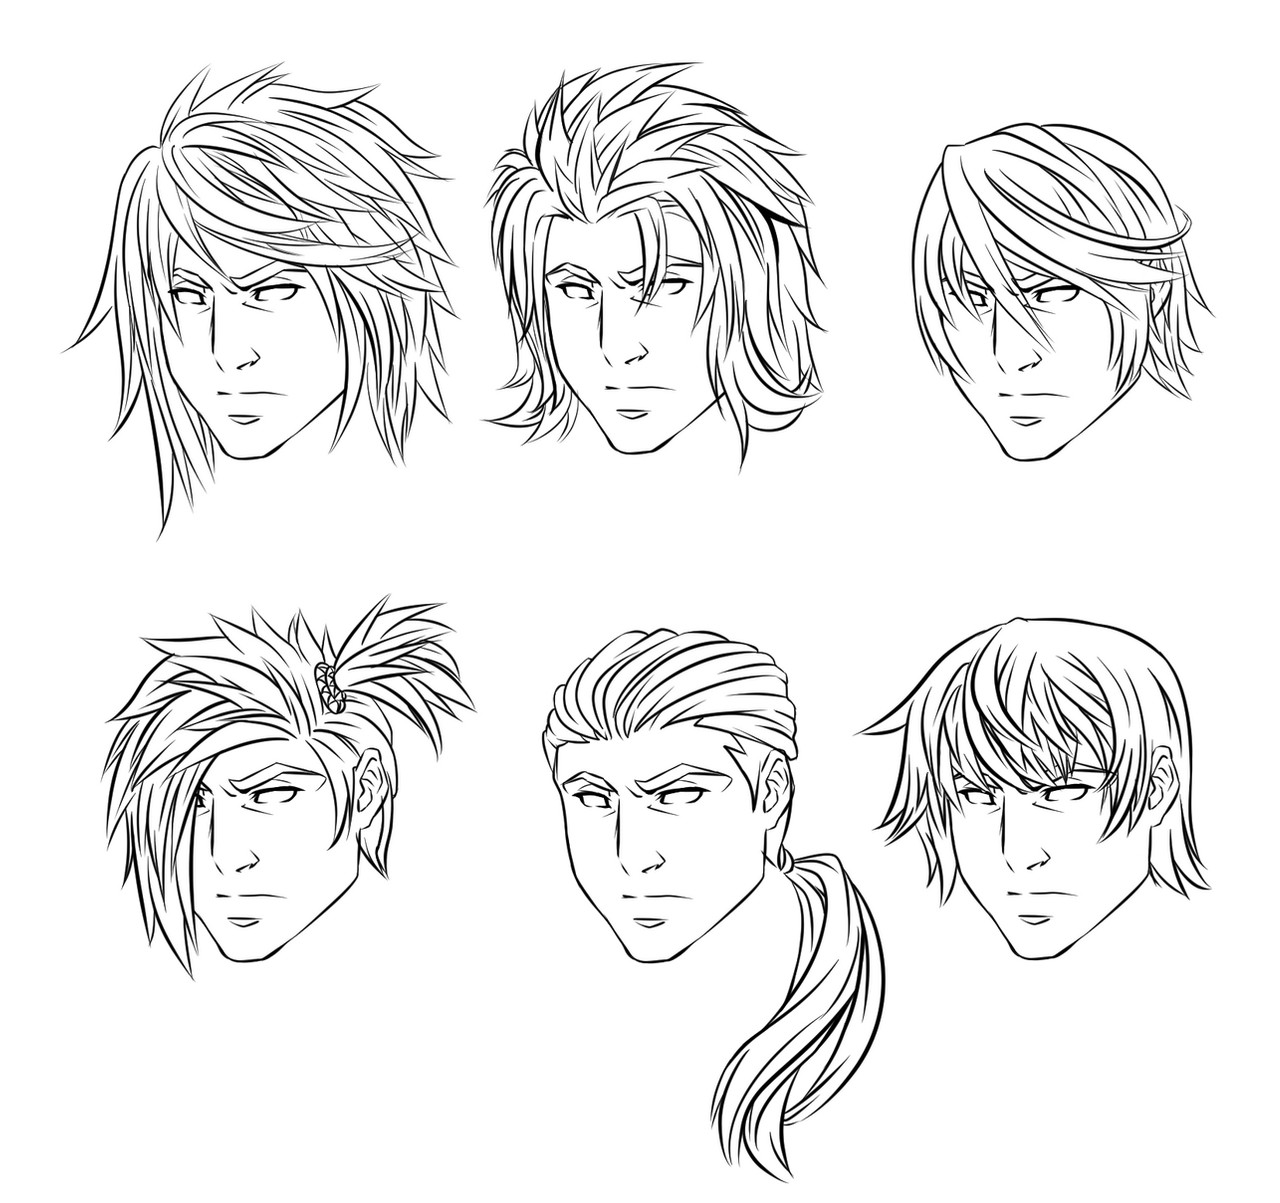 Anime Haircuts Male
 Anime Male Hairstyles by CrimsonCypher on DeviantArt